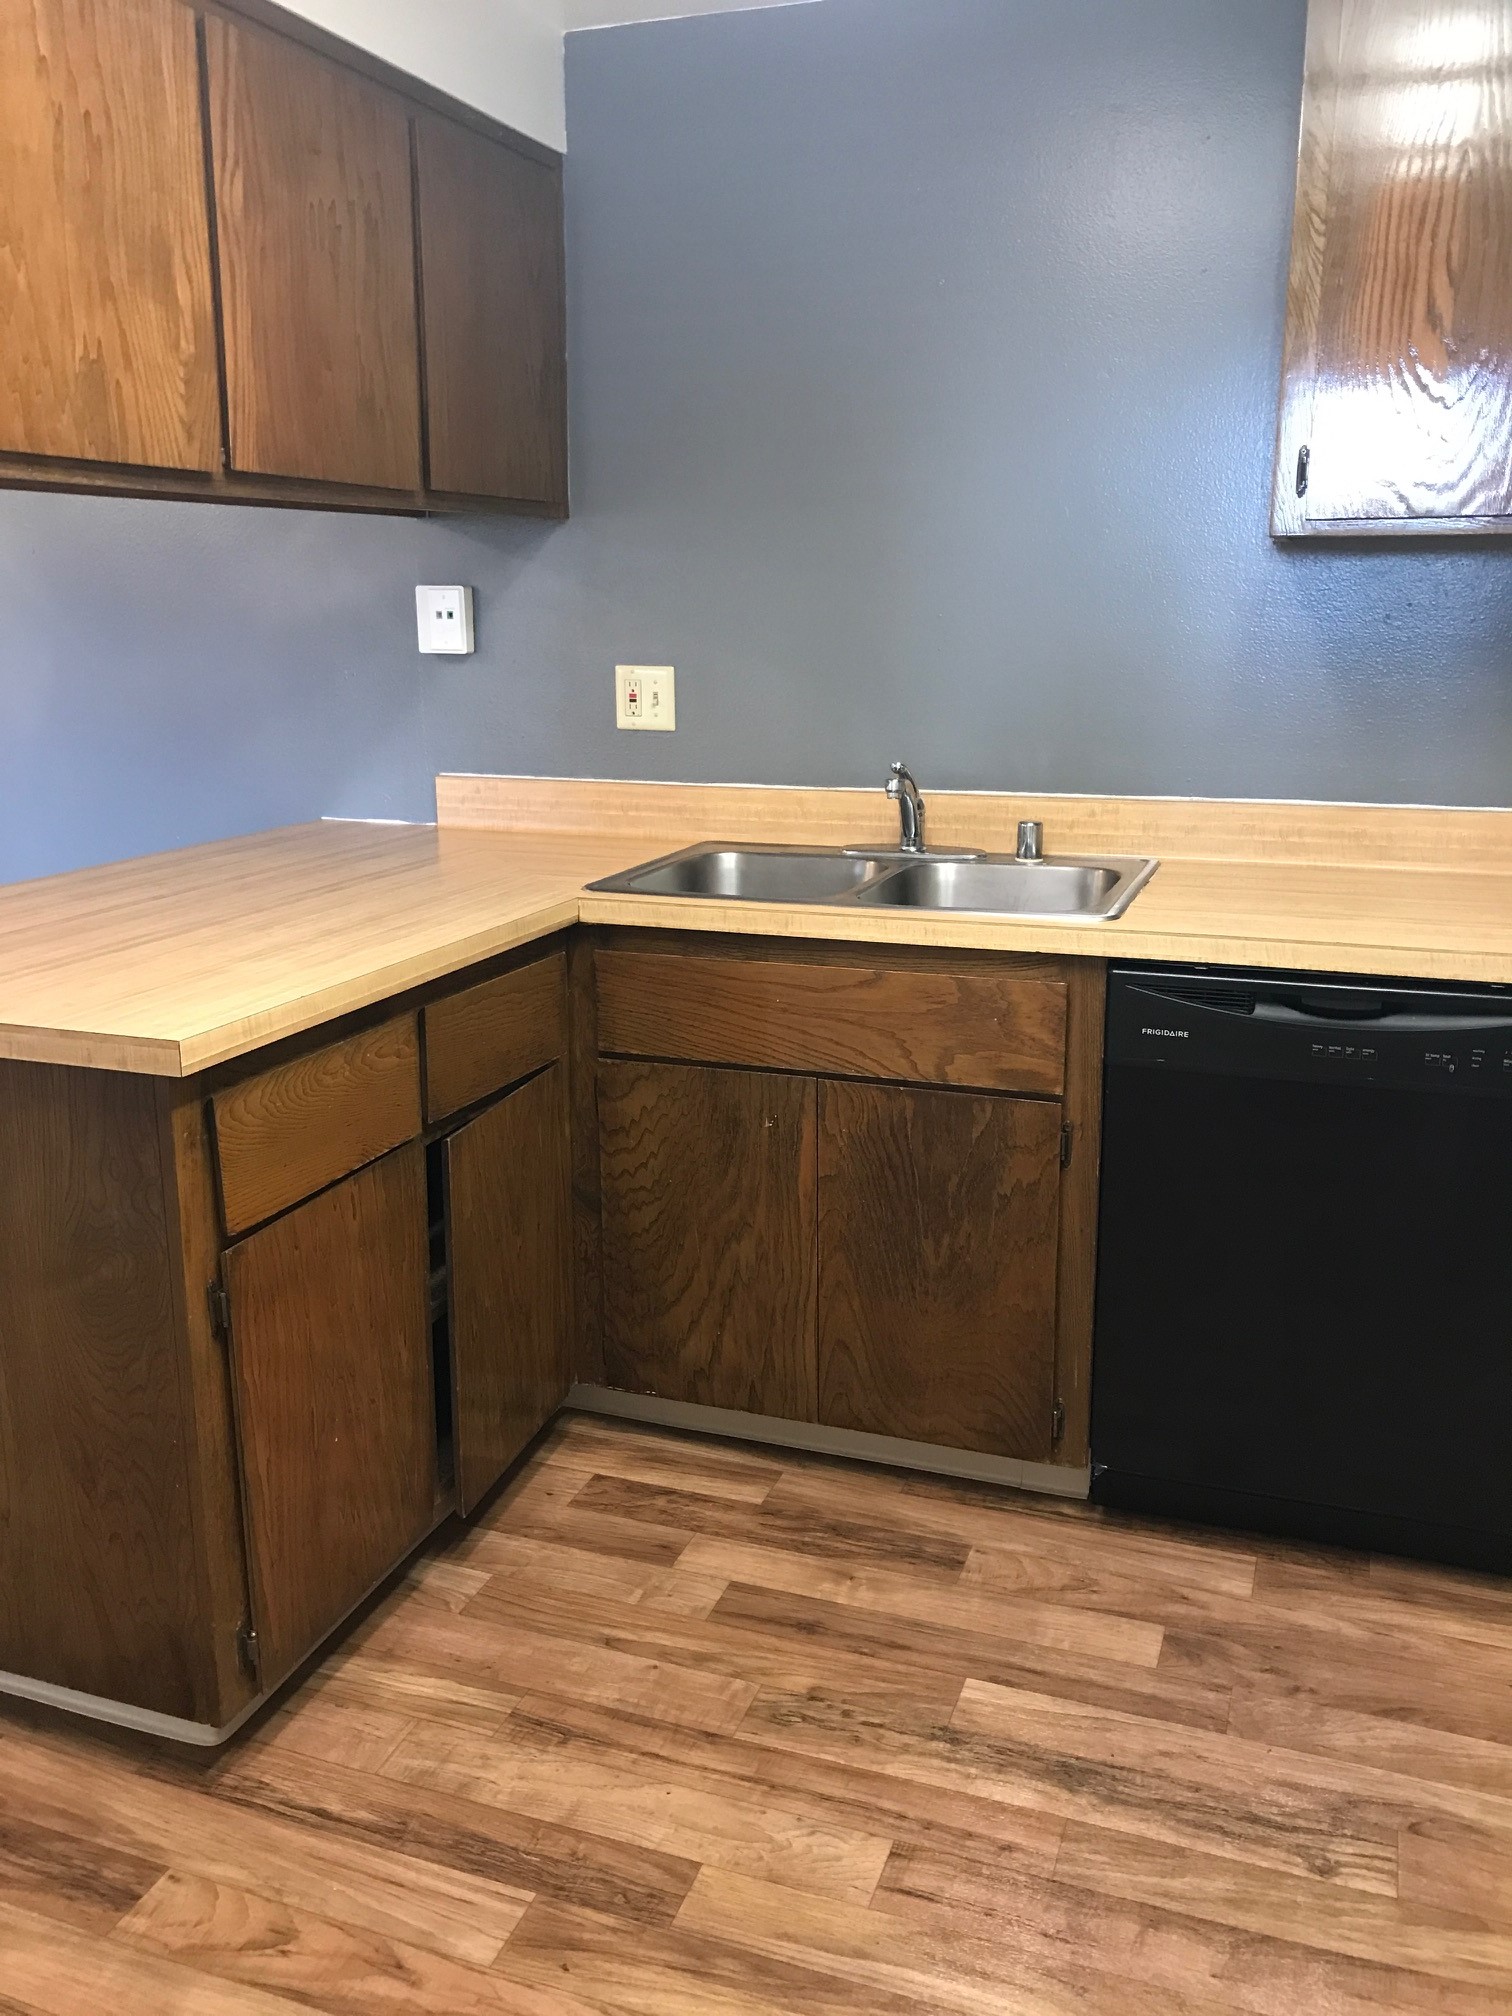 Vacant kitchen with stainless steel sink